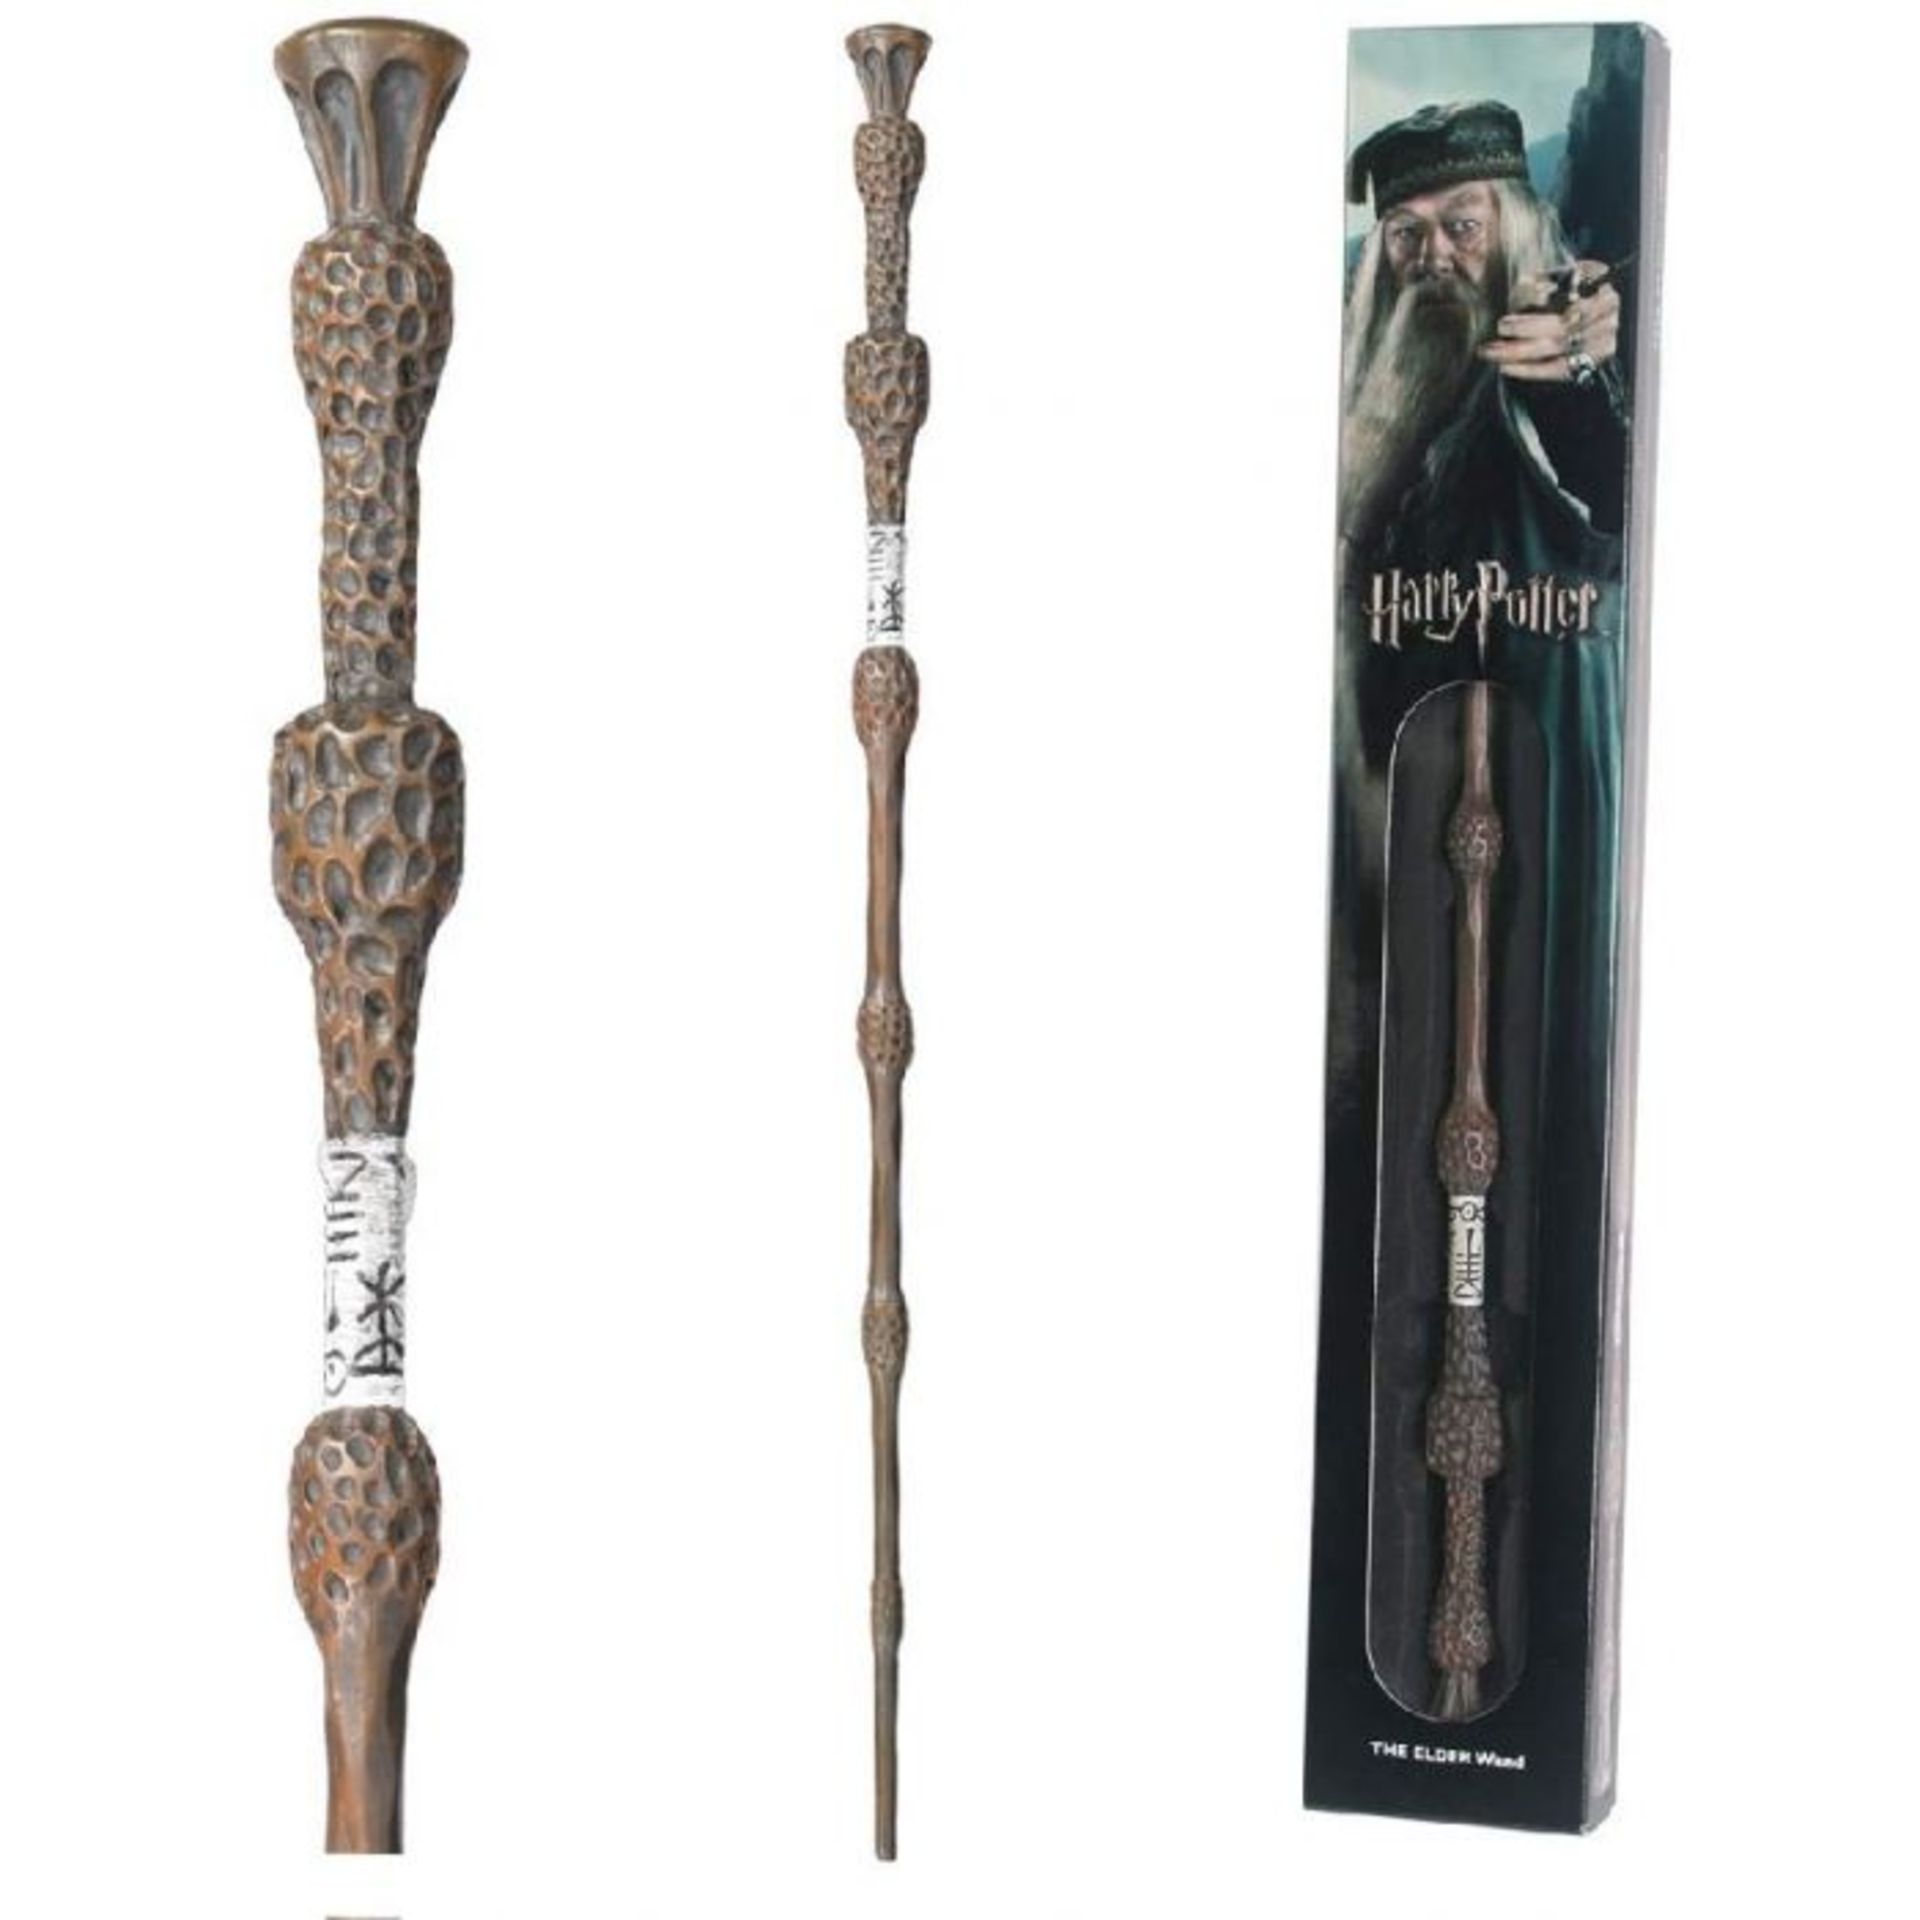 2 x  Harry Potter Toy's  - Harry Potter The Elder Wand And The Noble Collection Harry Potter - Image 4 of 4